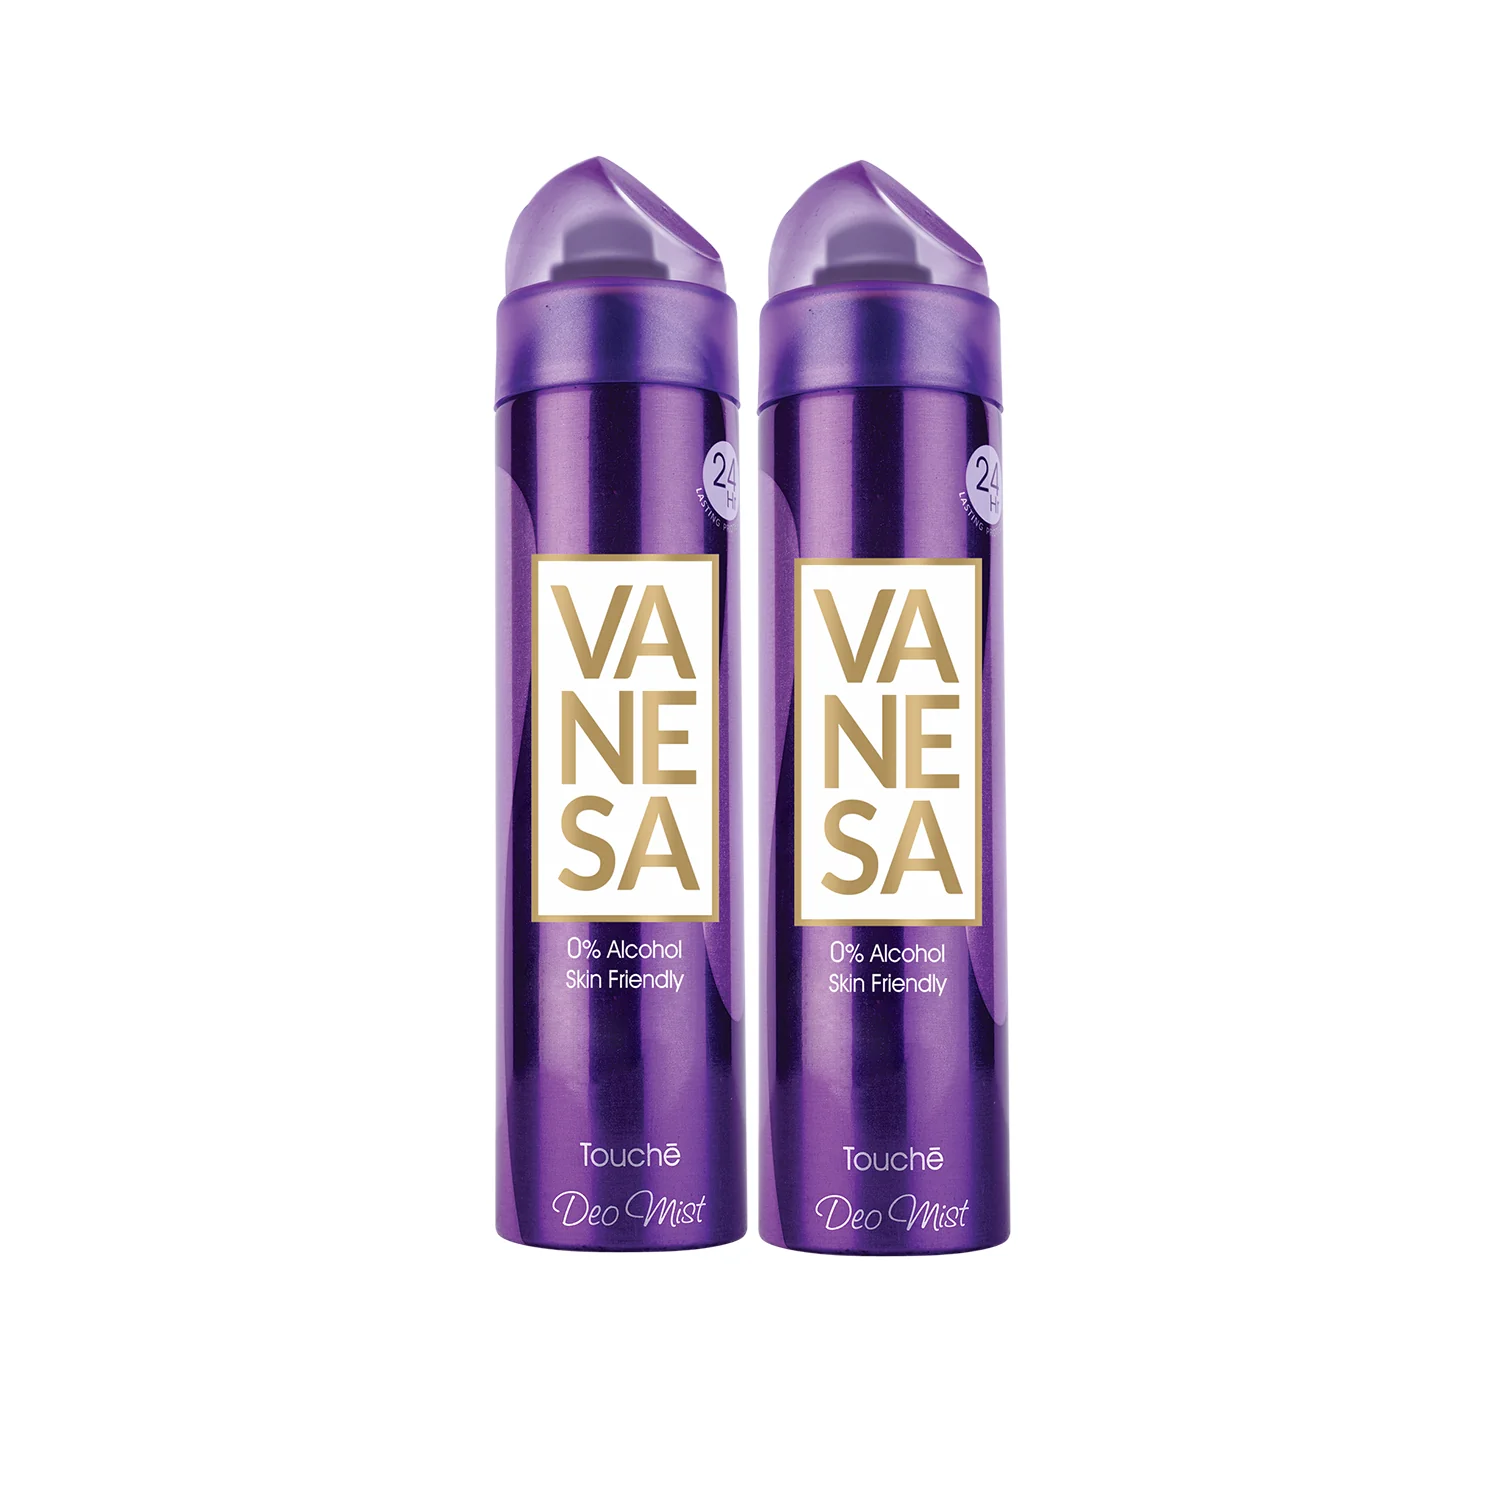 Vanesa Deo Mist 24 hours Lasting Protection For Women